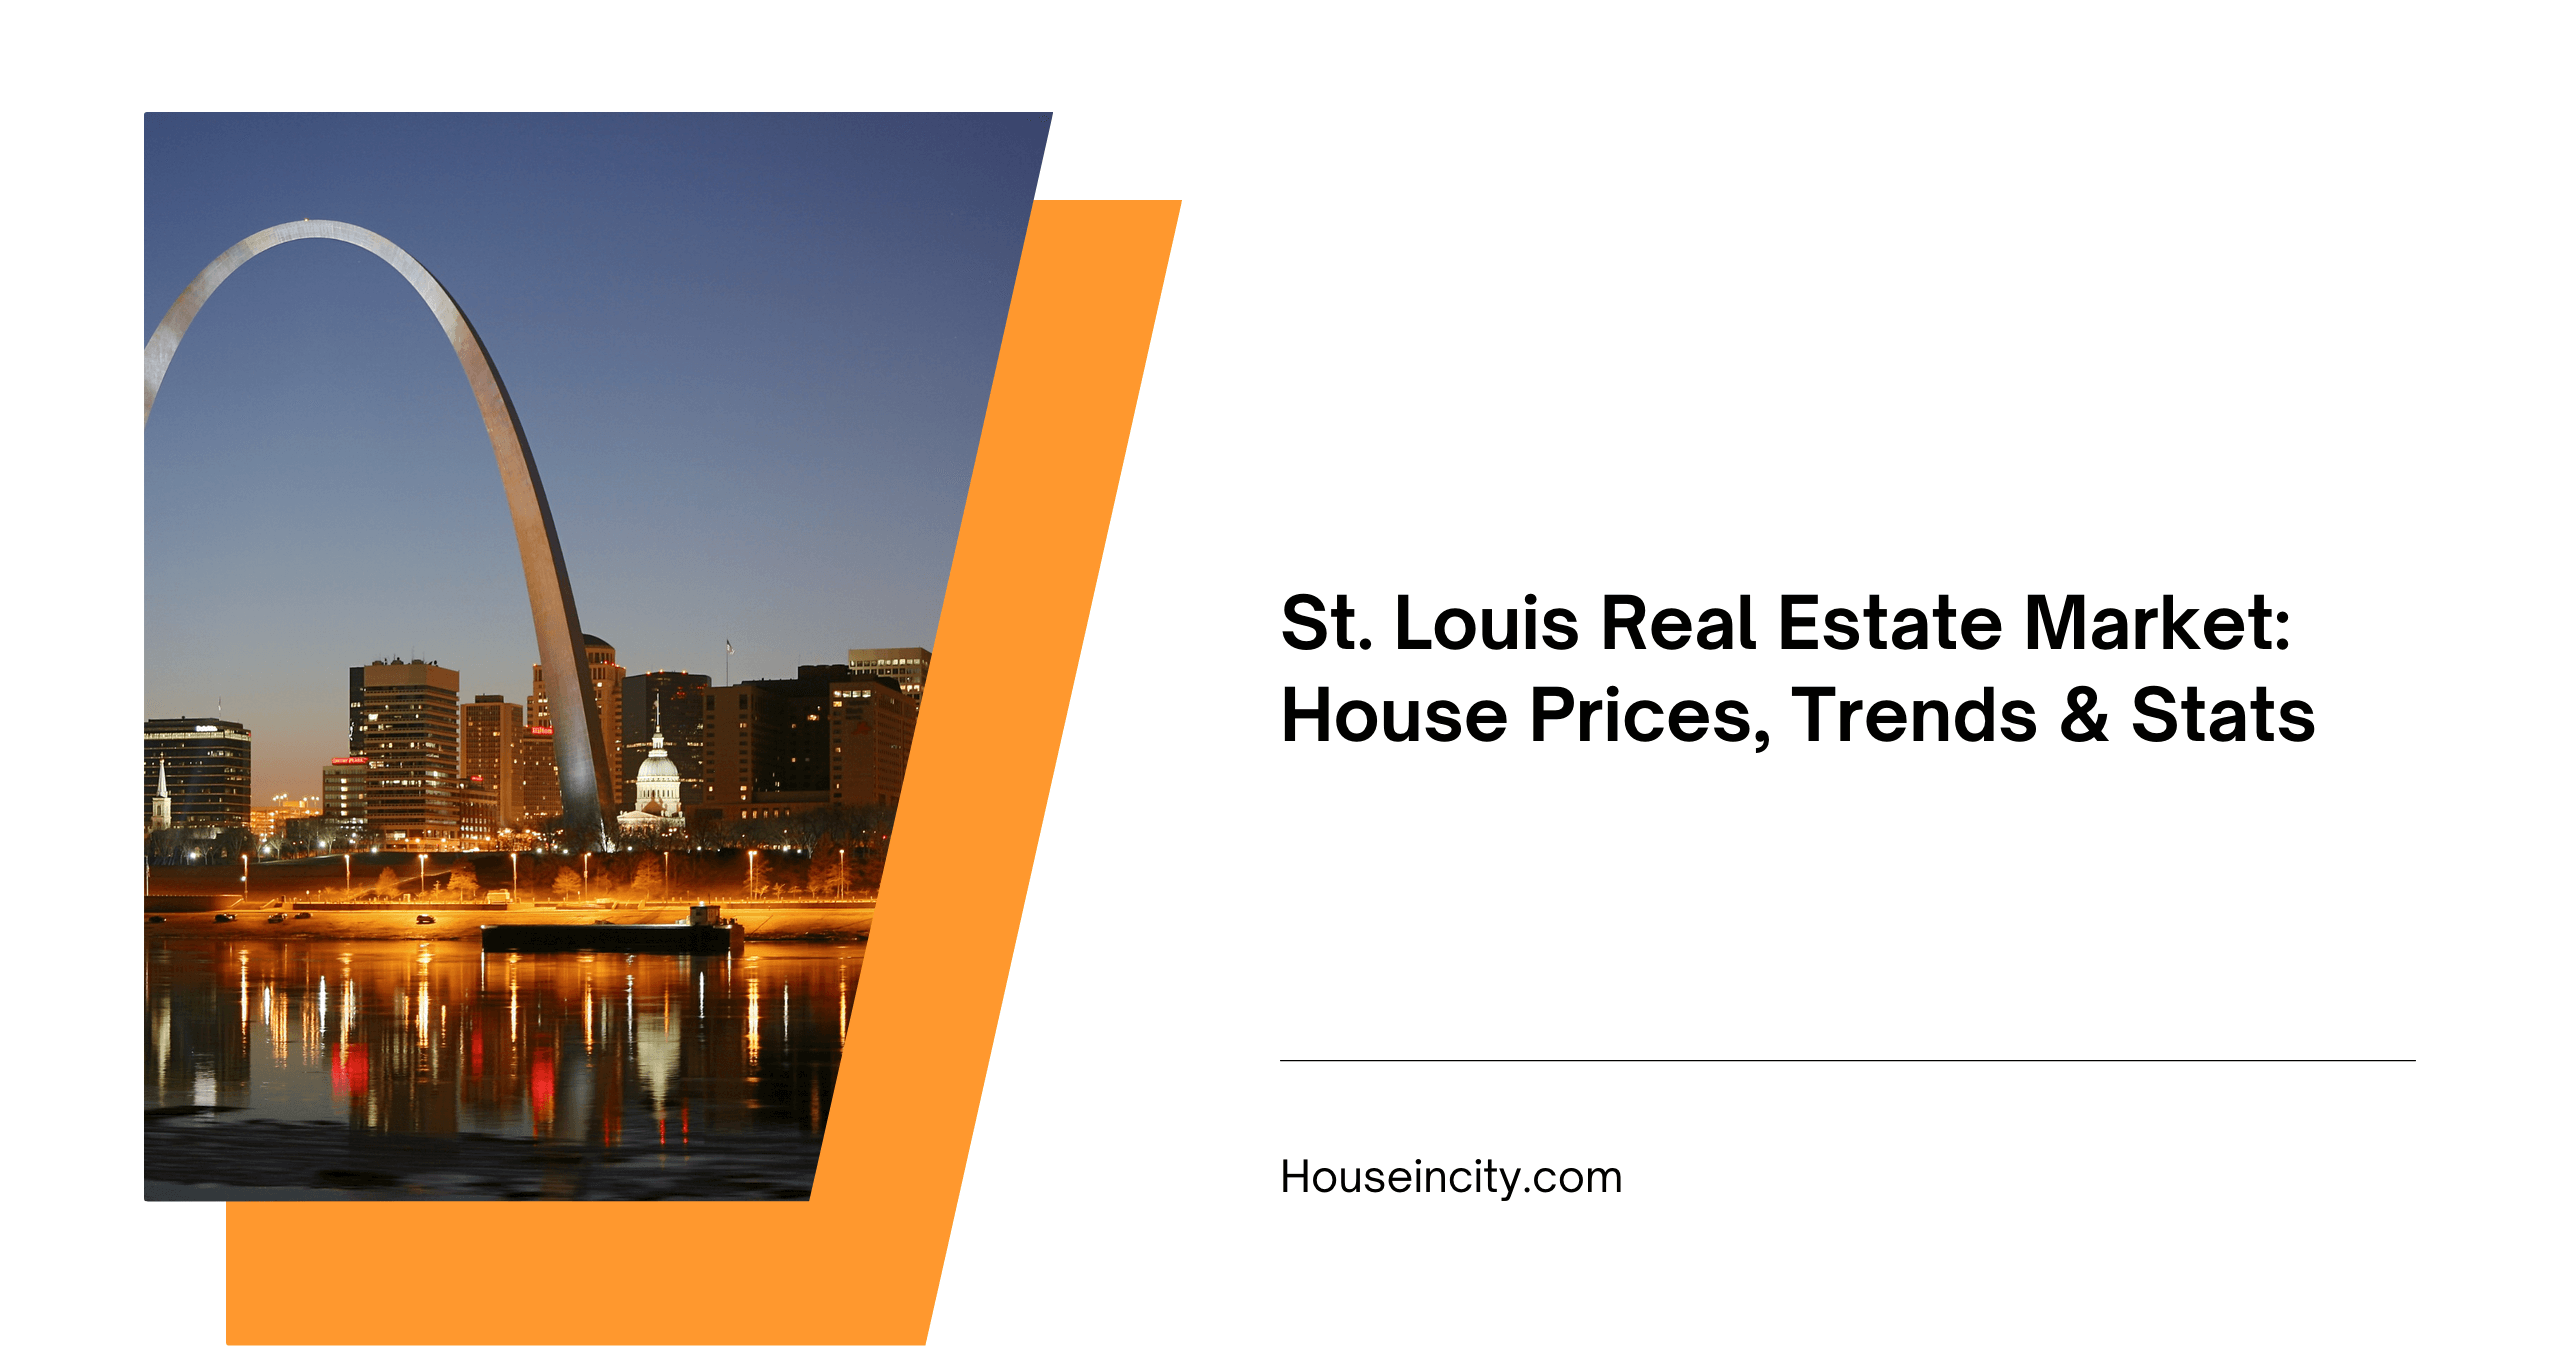 St. Louis Real Estate Market: House Prices, Trends & Stats